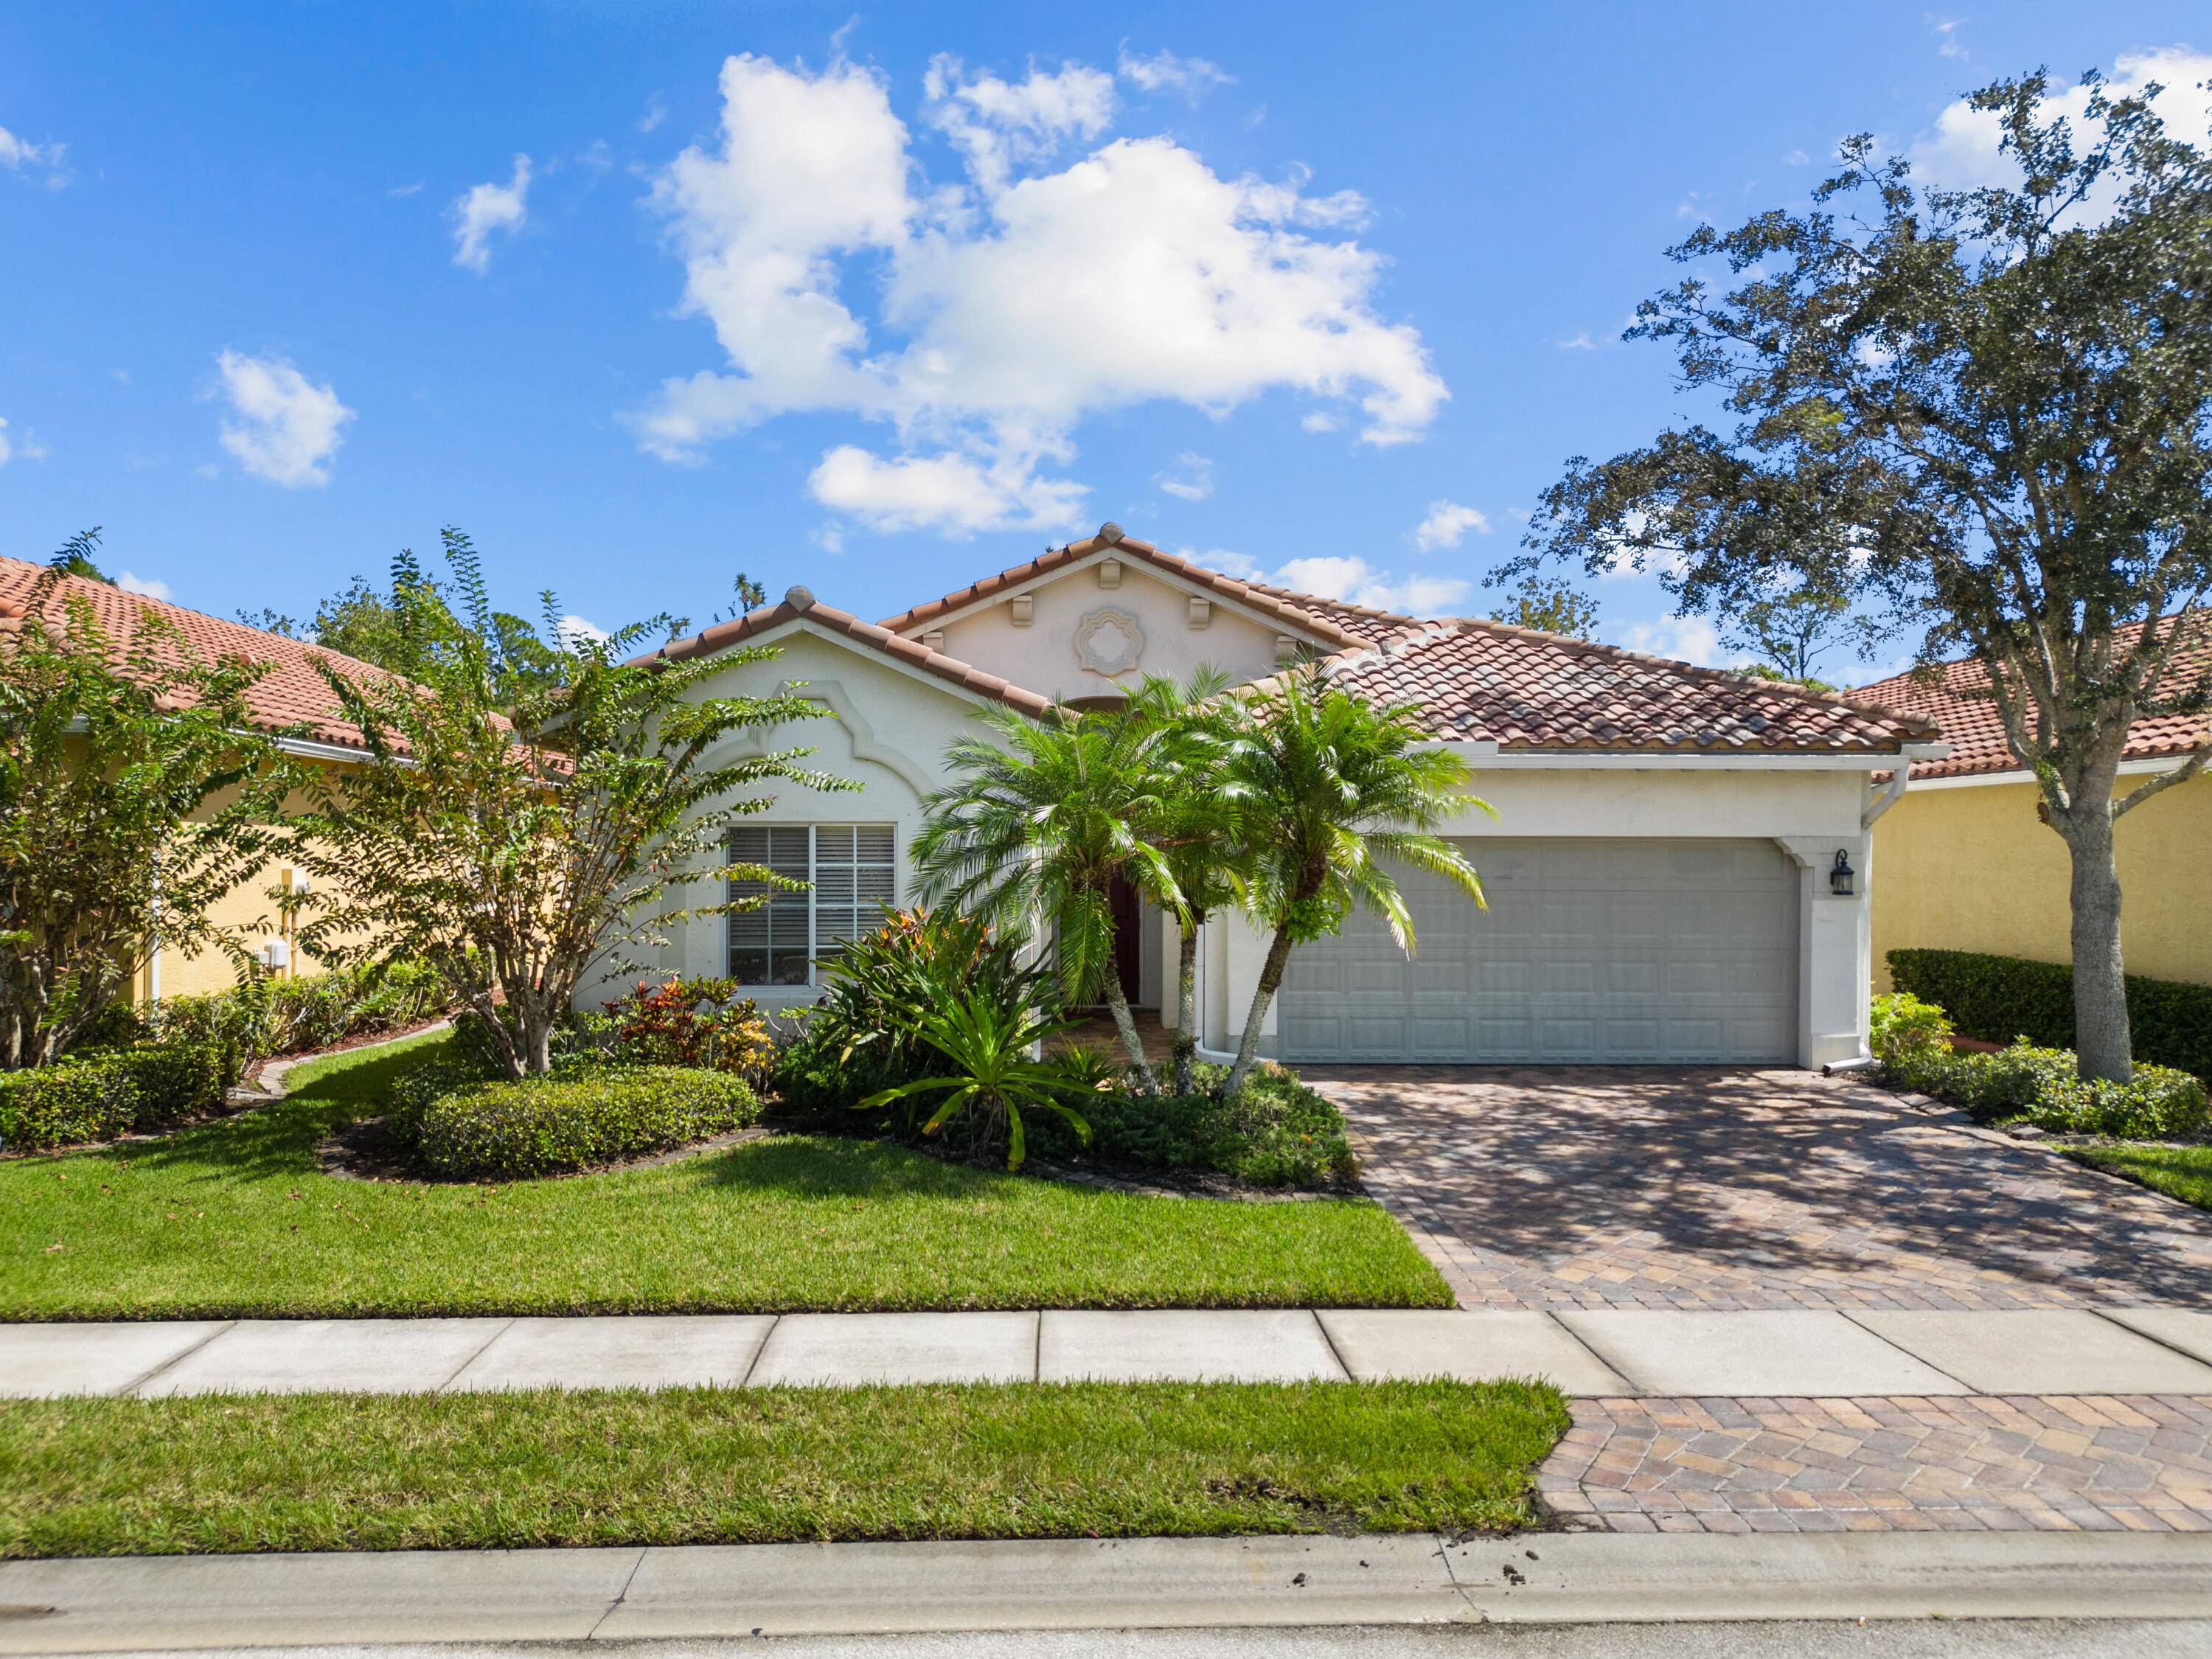 Discover the coveted Florida lifestyle in the heart of Woodfield Vero Beach with this inviting home.